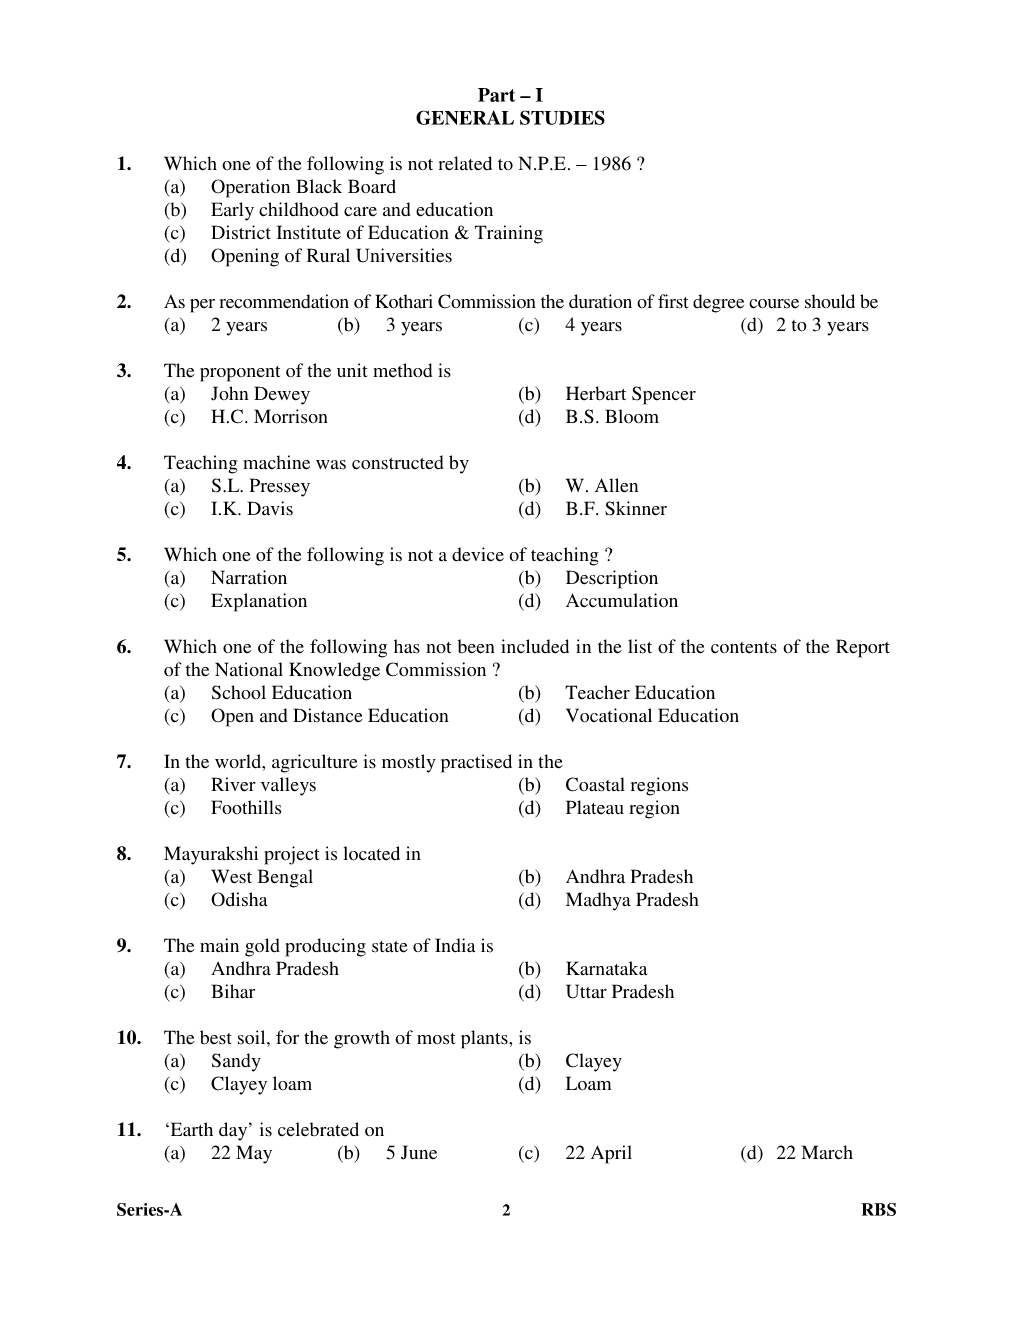 Part – I GENERAL STUDIES 1. Which One of the Following Is Not Related To